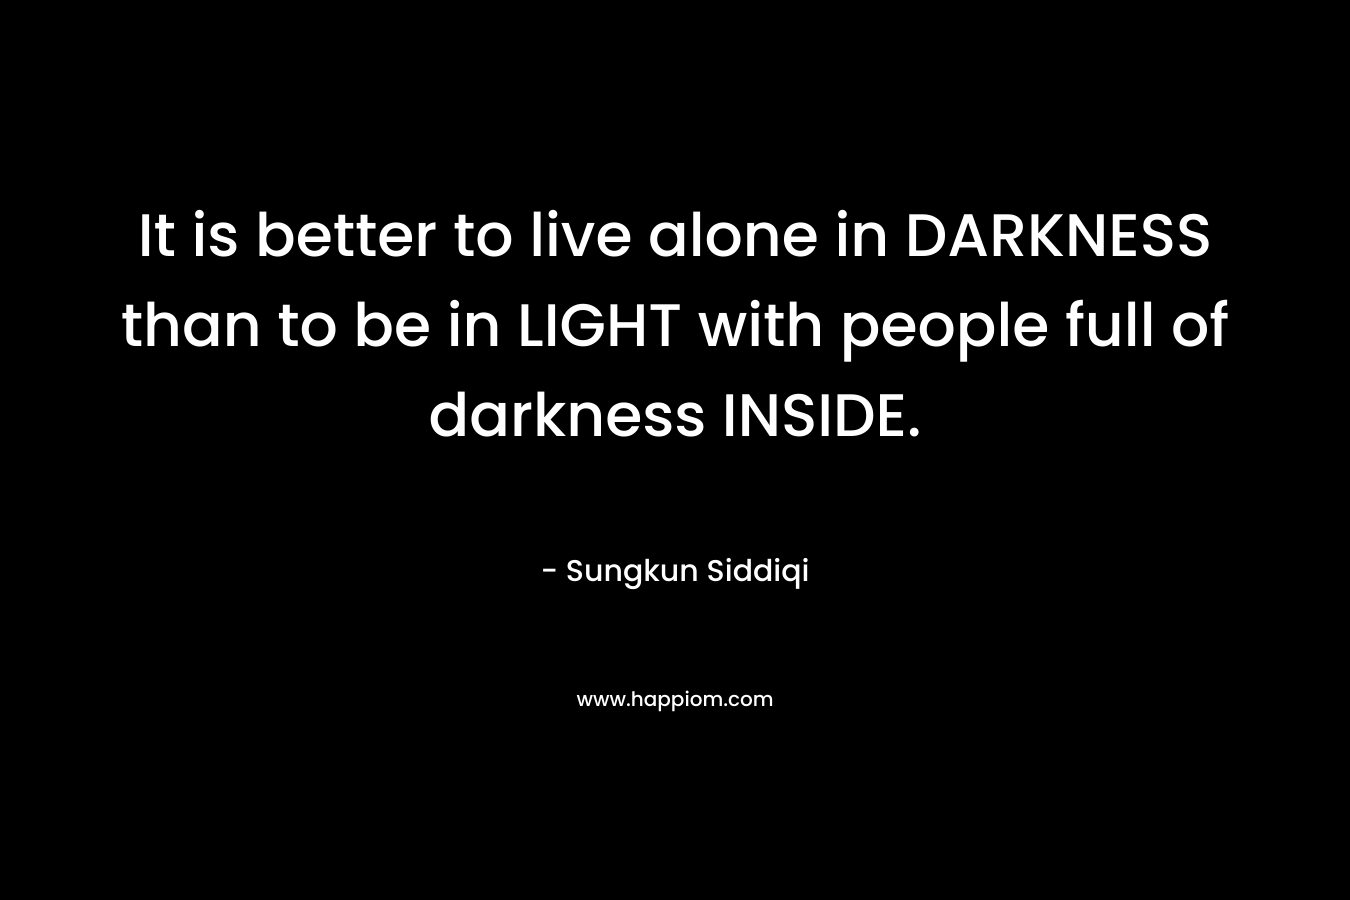 It is better to live alone in DARKNESS than to be in LIGHT with people full of darkness INSIDE.